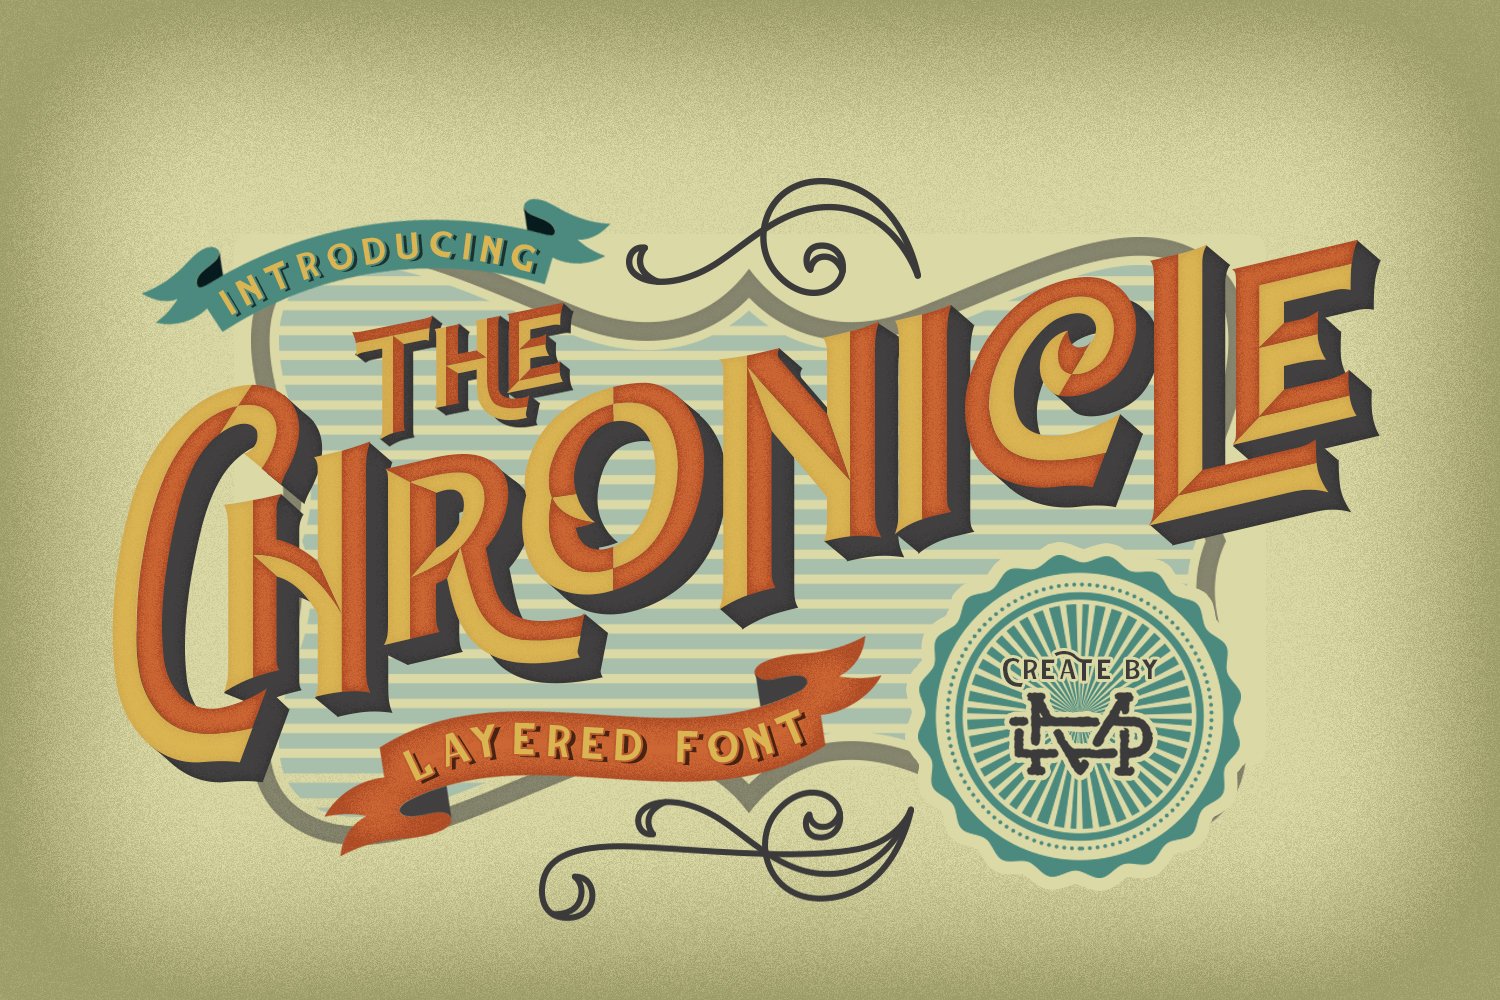 The Chronicle - Blackletter Typeface cover image.